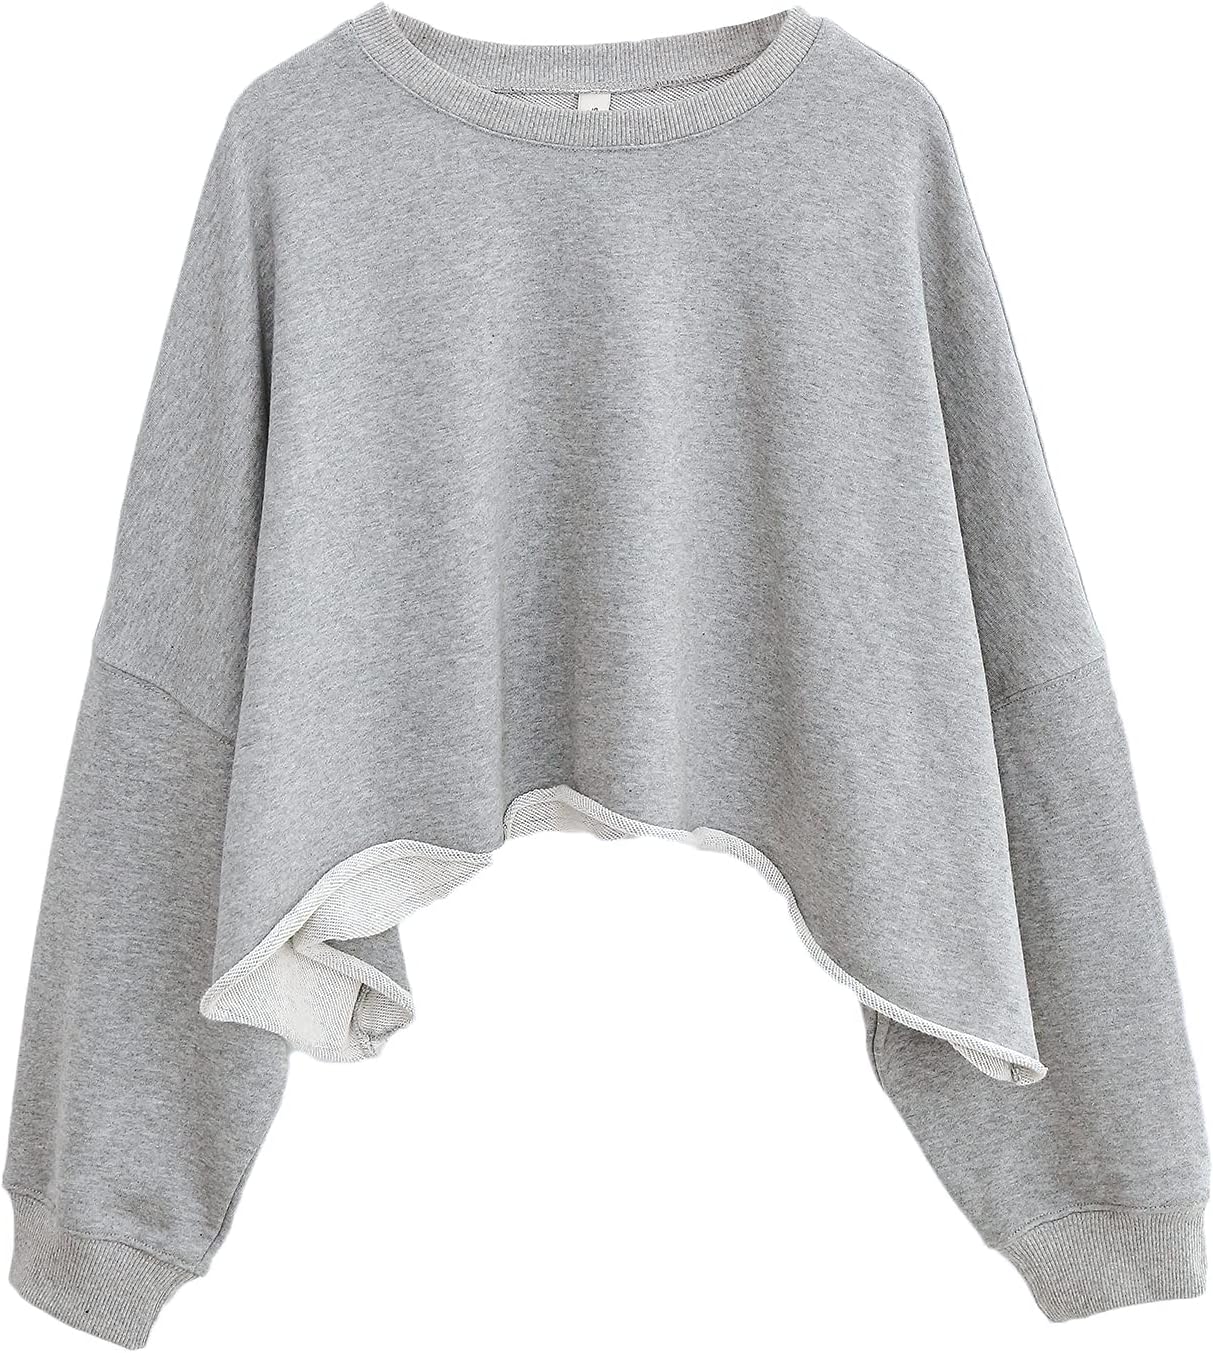 NTG Fad Heather Grey / X-Small Amazhiyu Women’s Cropped Hoodie Pullover Long Sleeve Crewneck Crop Tops Oversize Fit